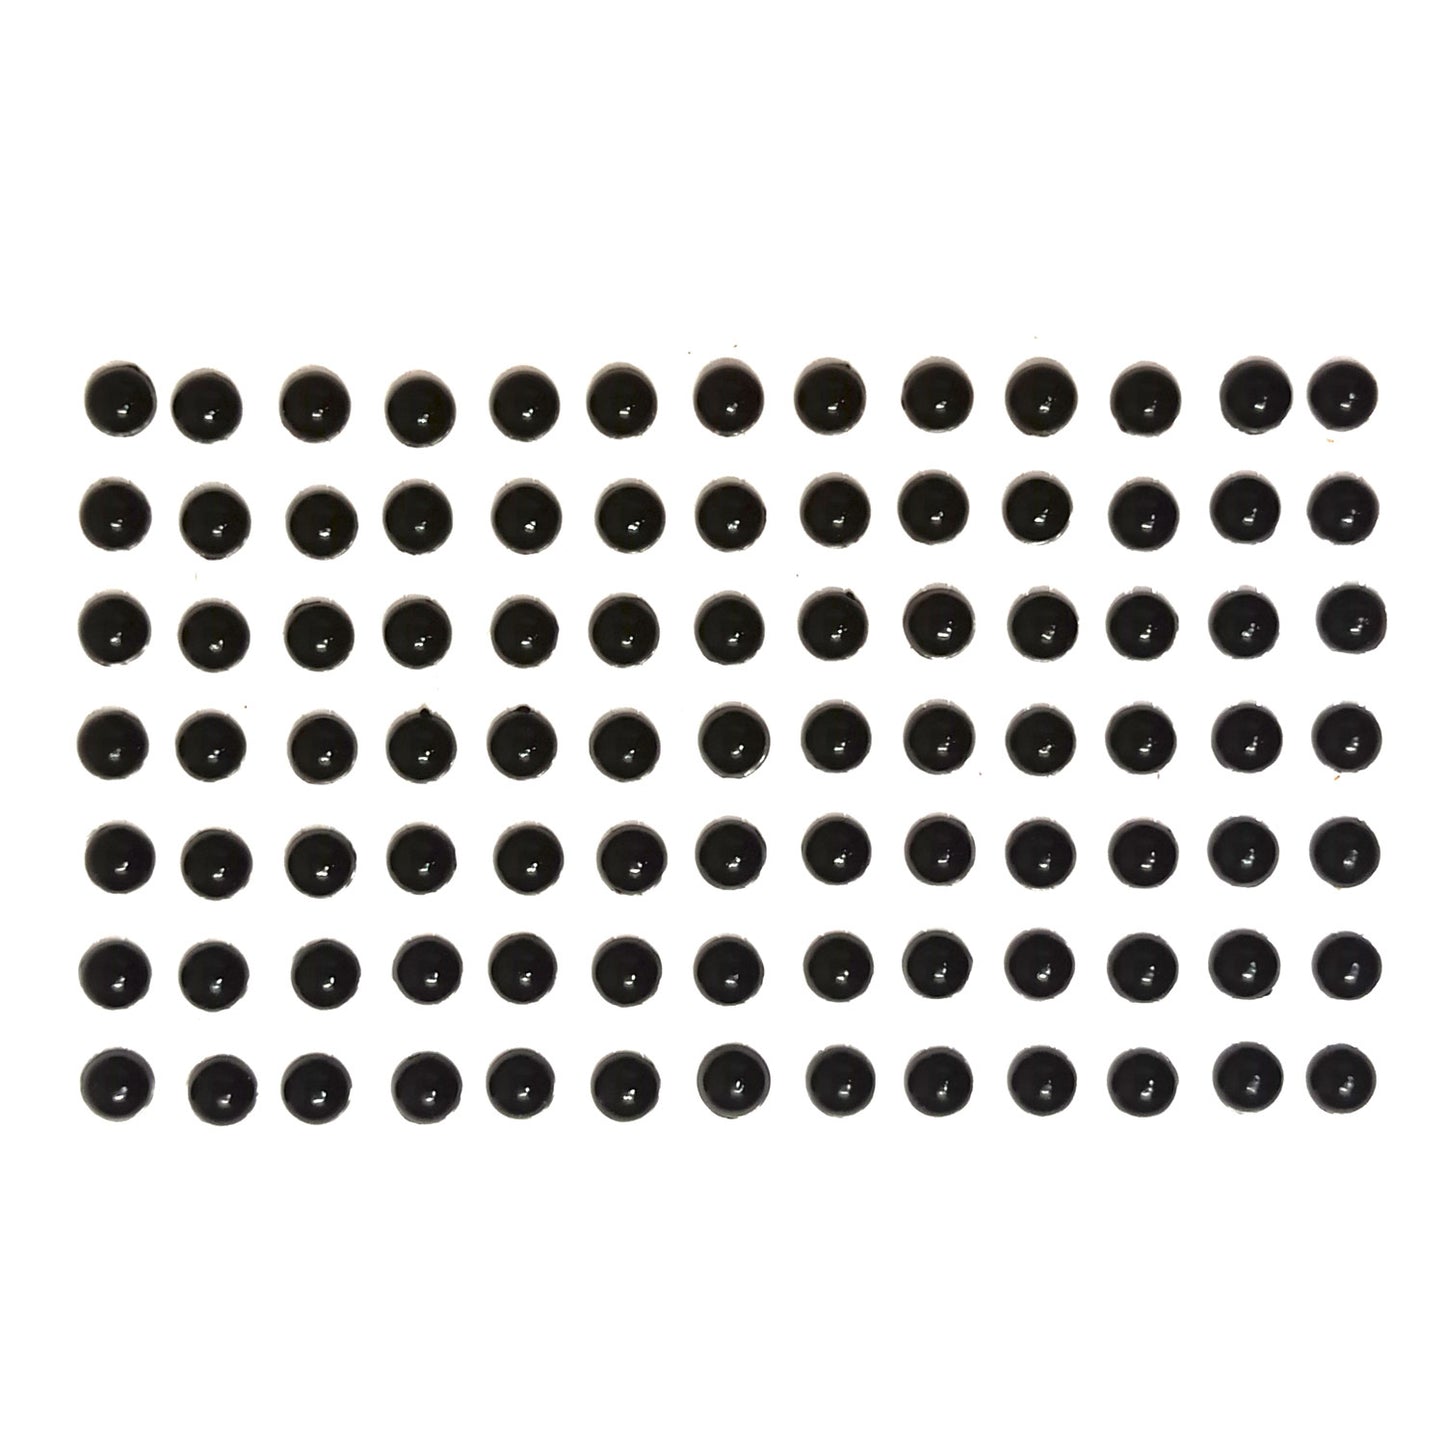 6mm Black Half Pearl Bead Sticker (Pack of 1 sheets, DC-05)